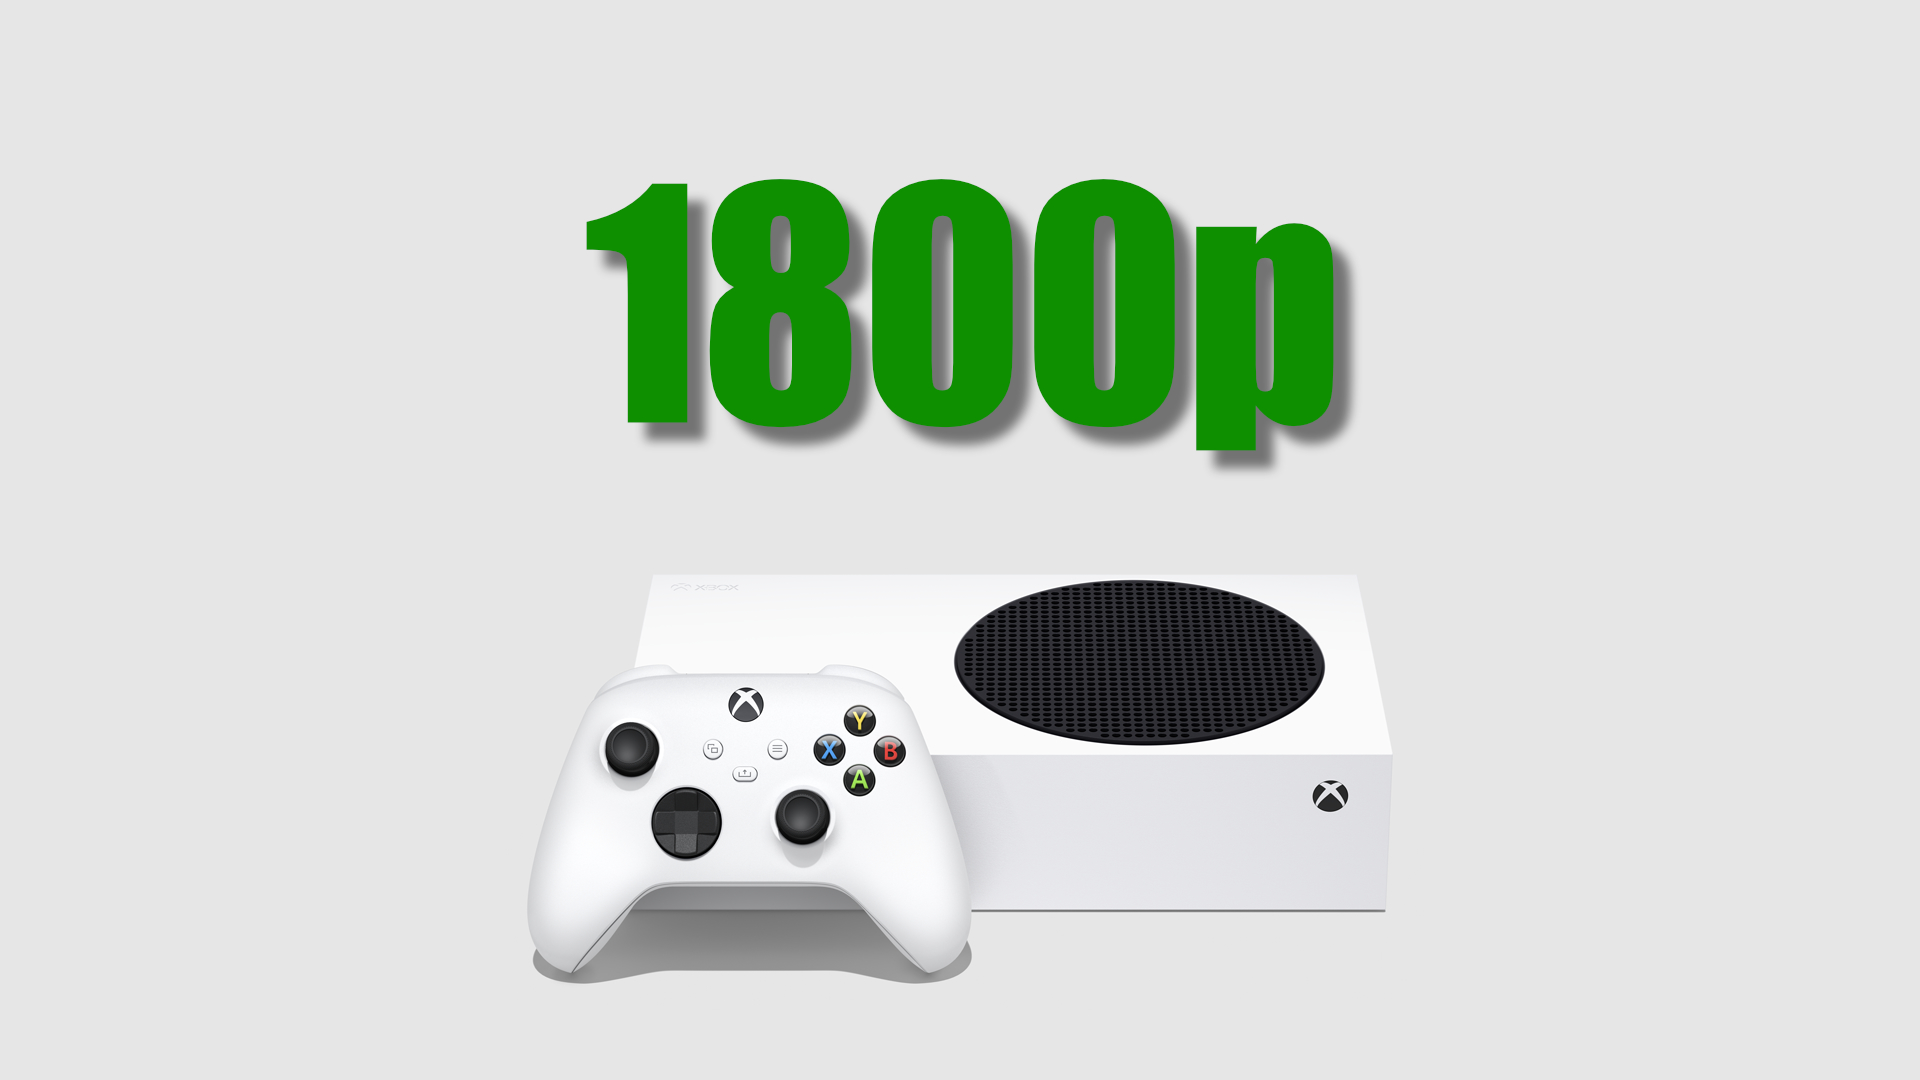 The Xbox Series S can go beyond 1440p